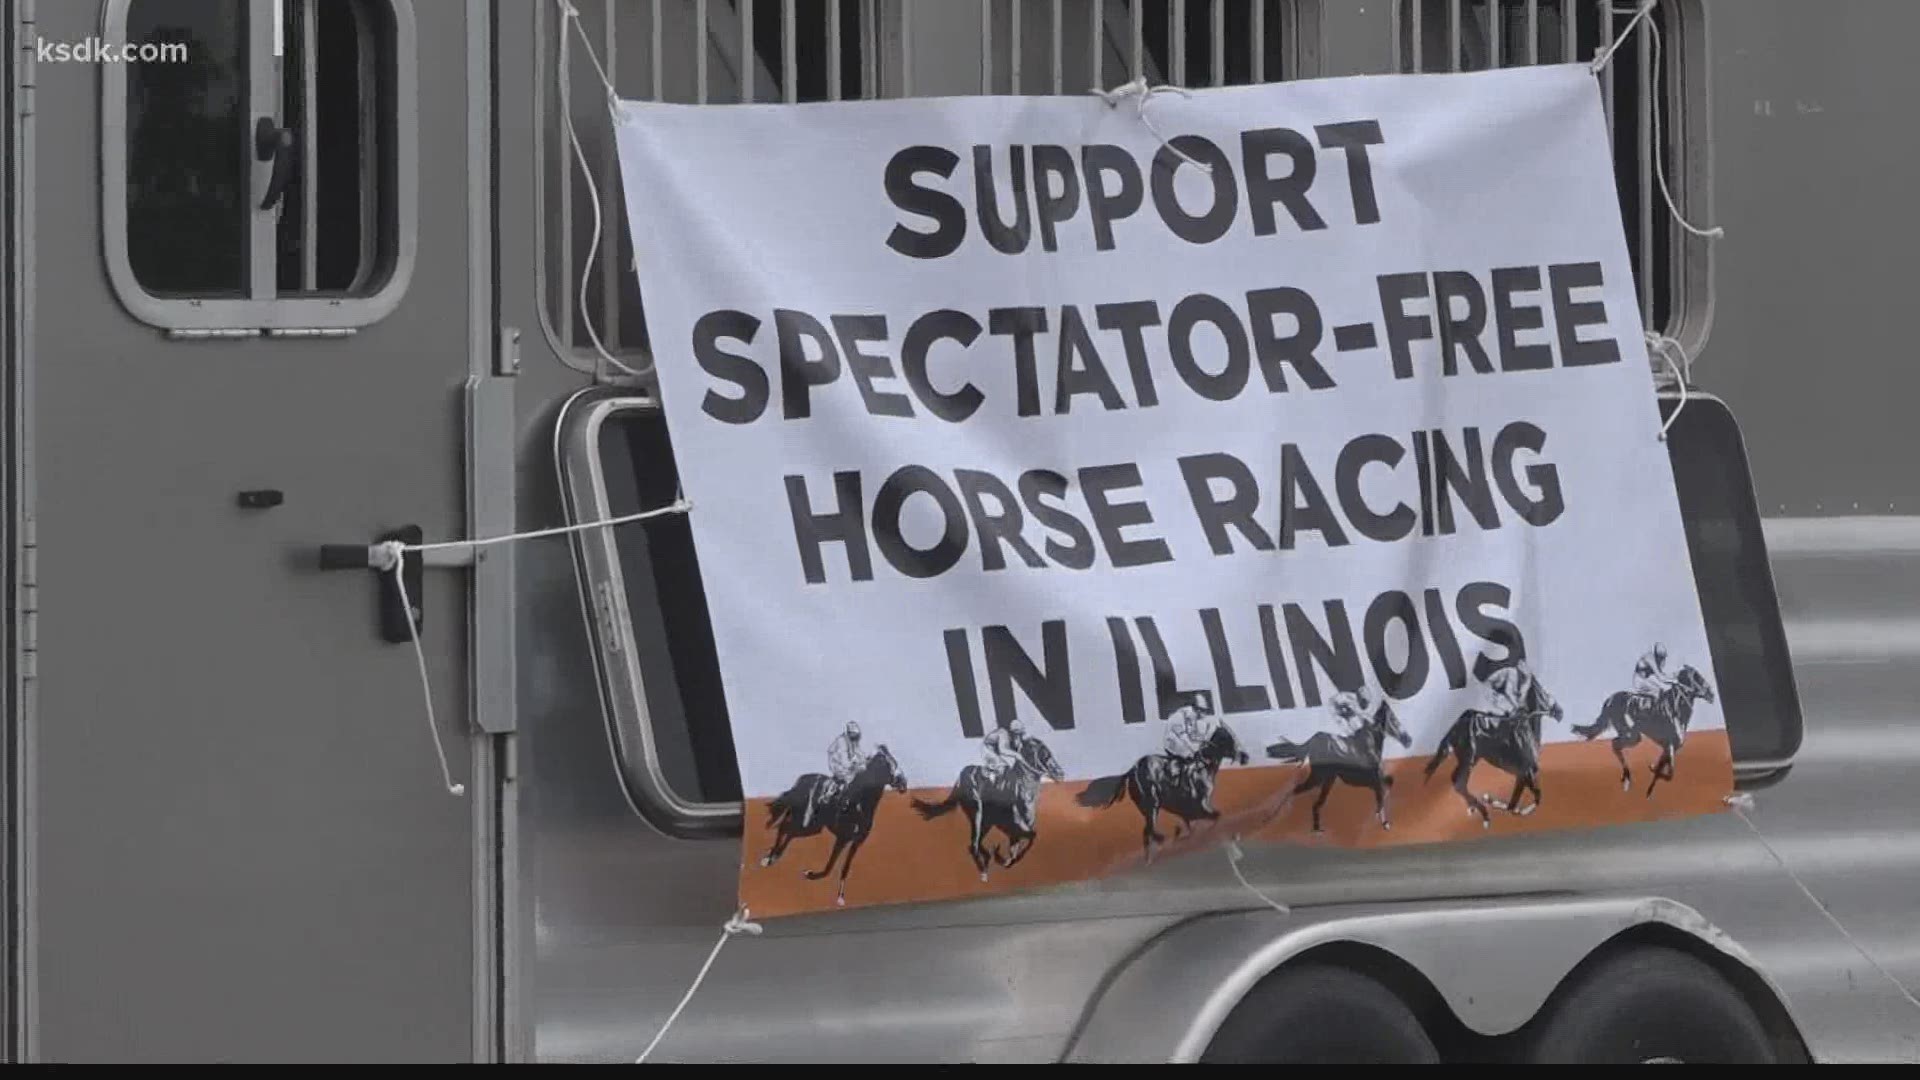 Other states have allowed tracks to open spectator-free racing, to make money off online betting.